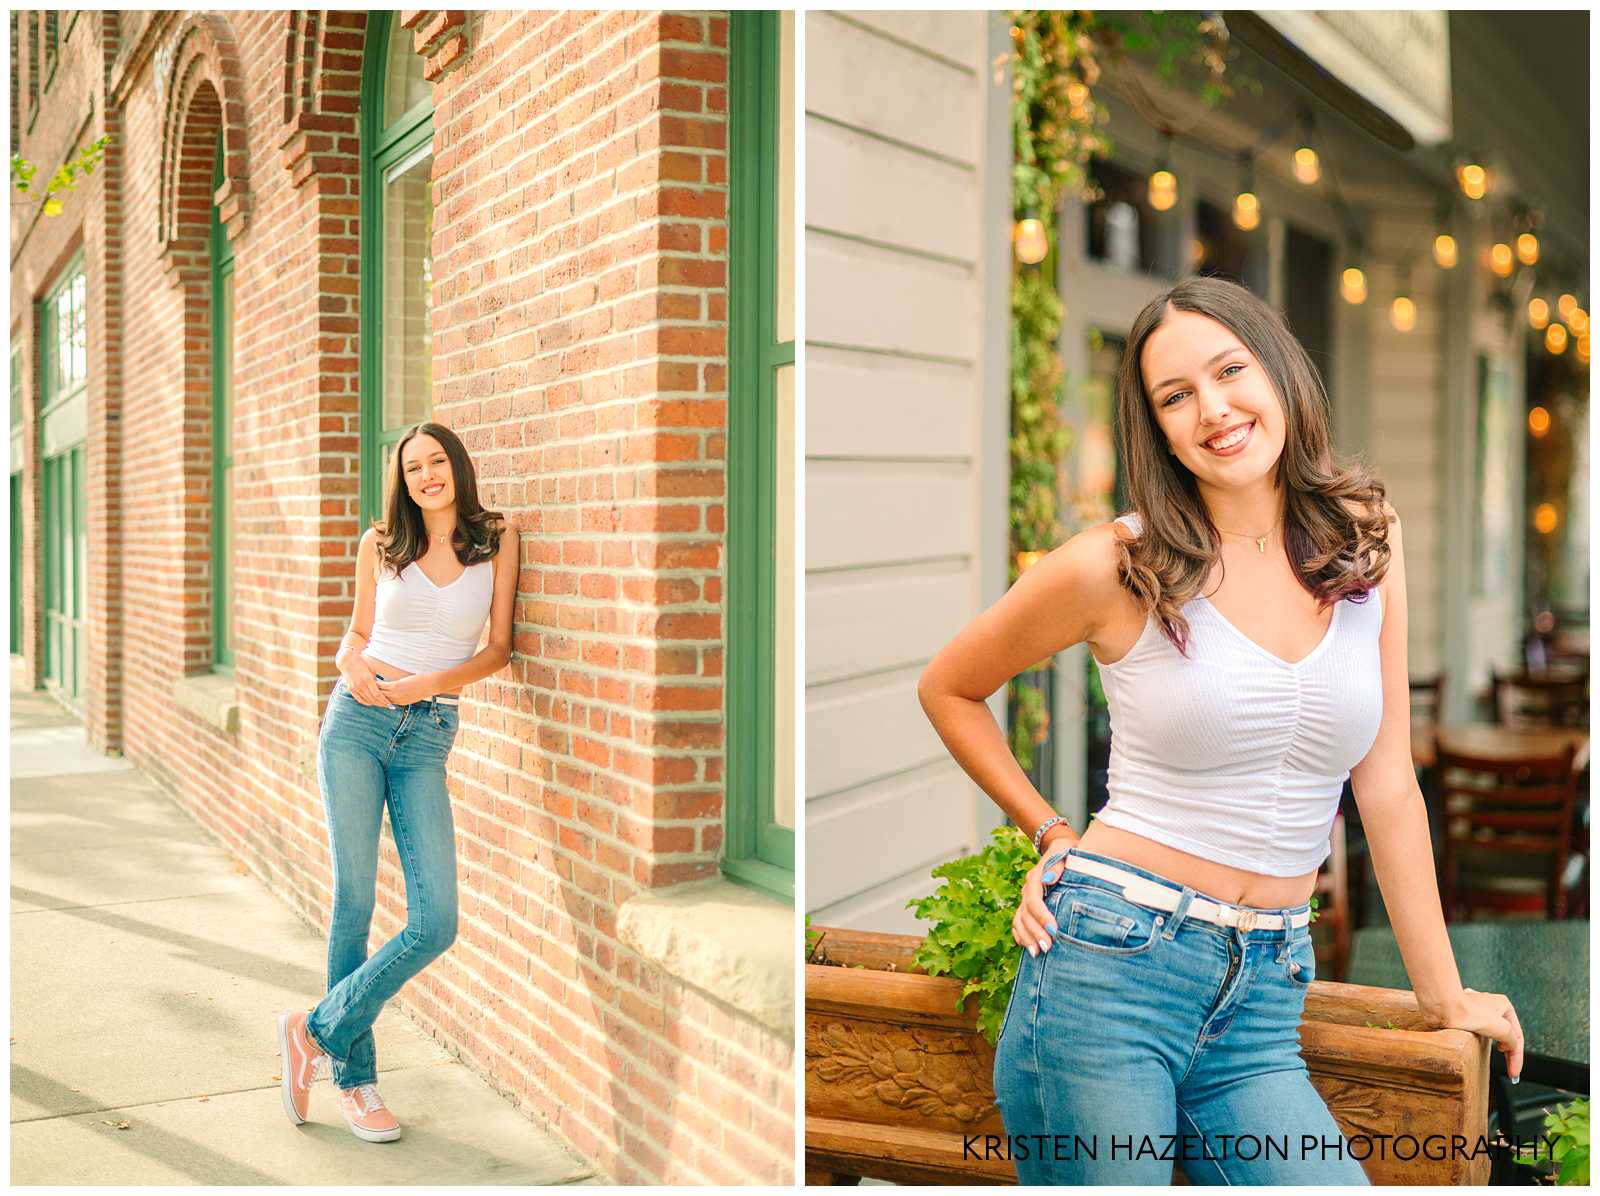 Downtown senior portraits in Pleasanton, CA; a girl wearing a white crop top and blue jeans leaning against a brick wall